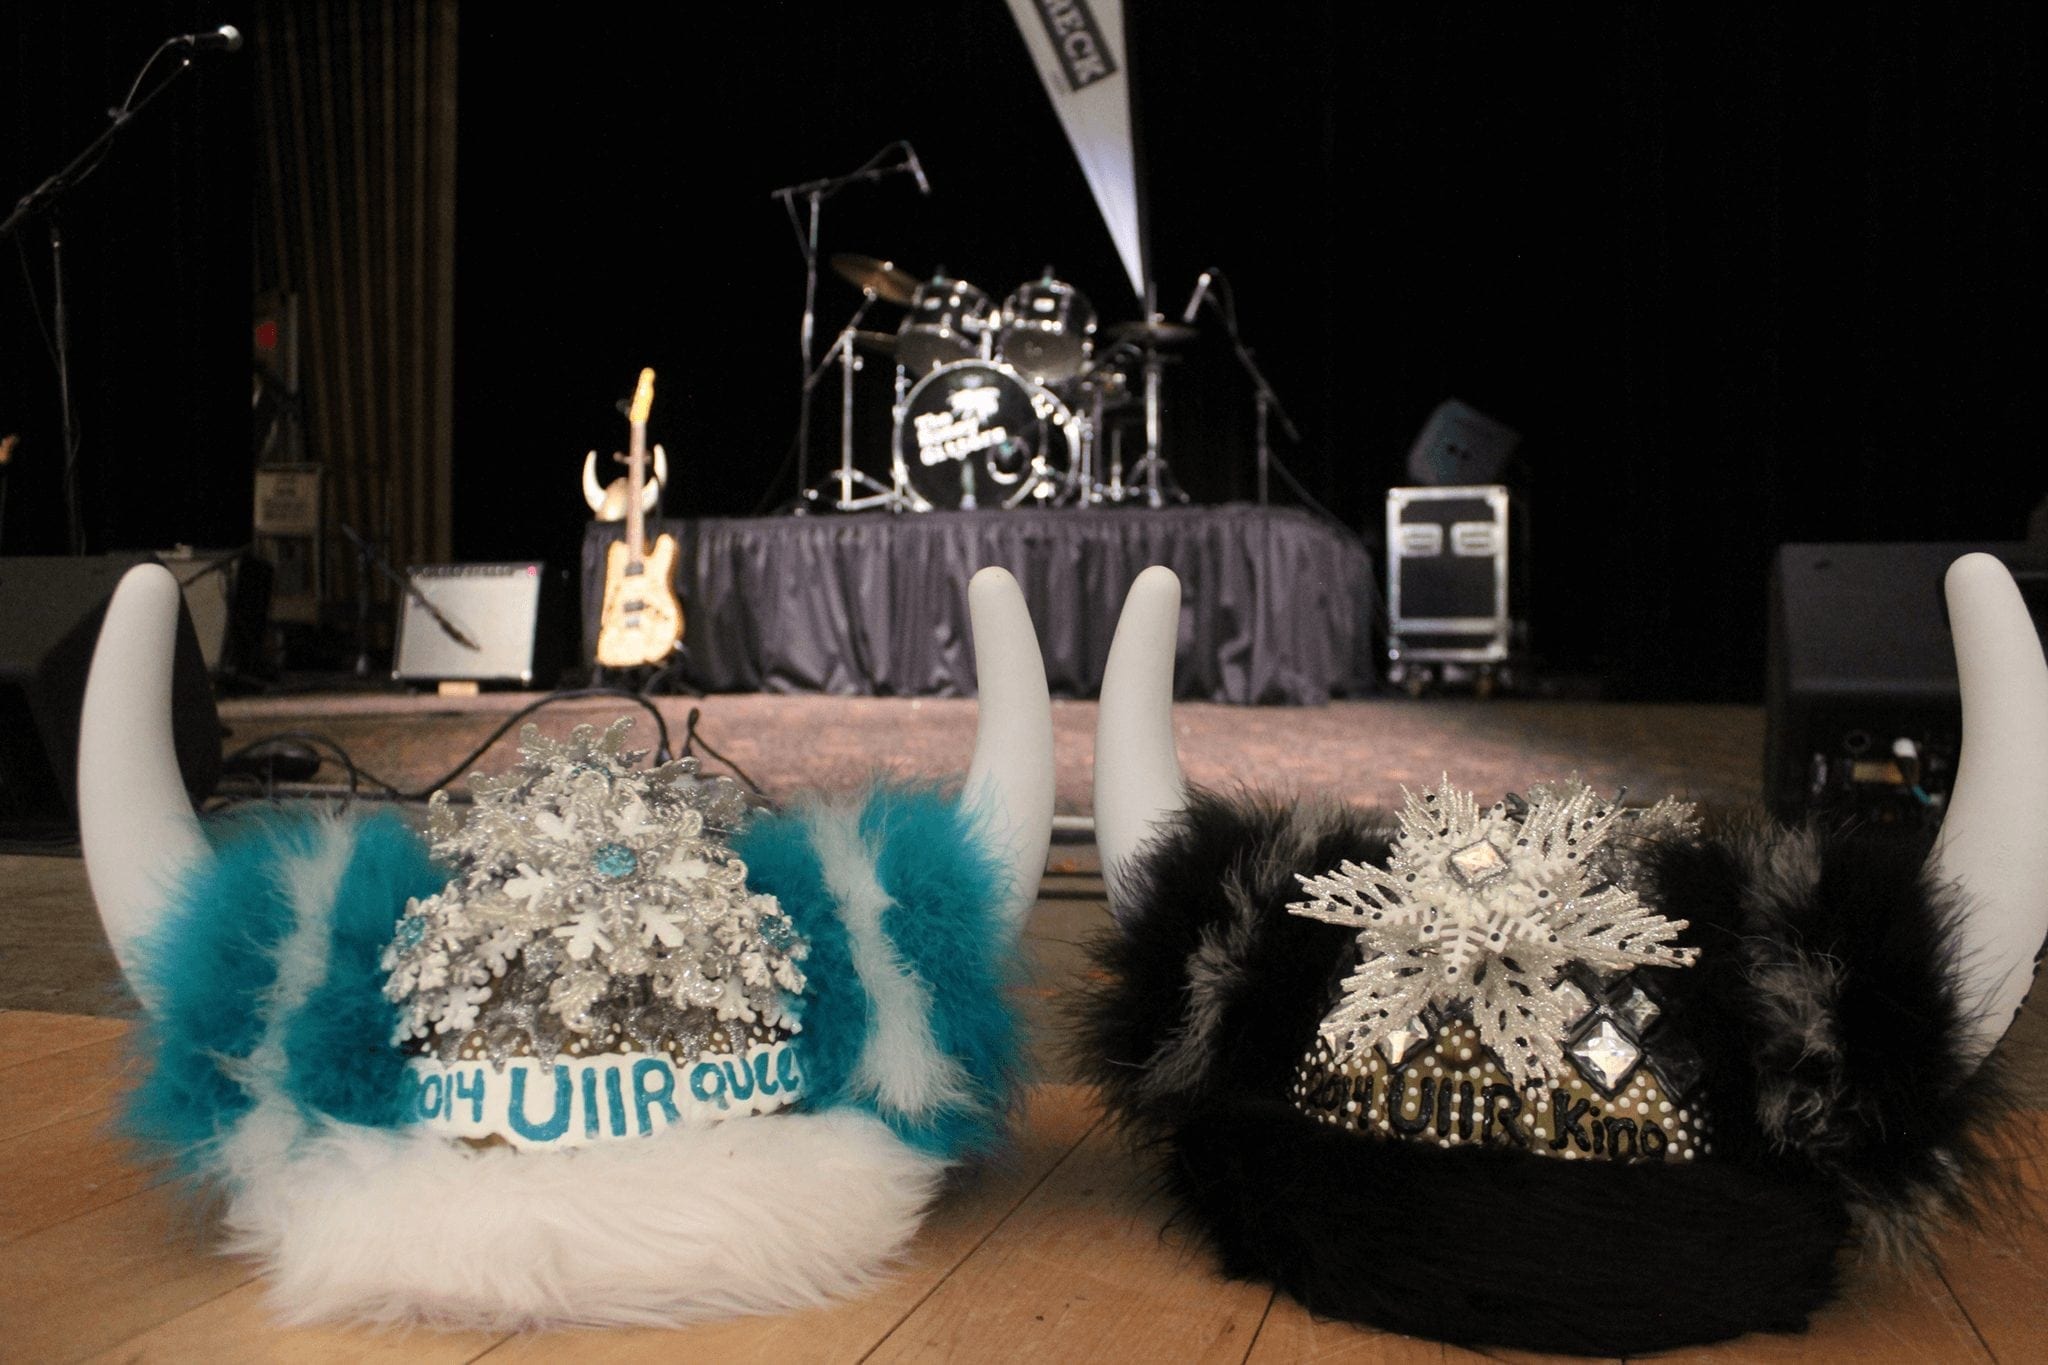 King and Queen Viking Crowns for Ullr Fest